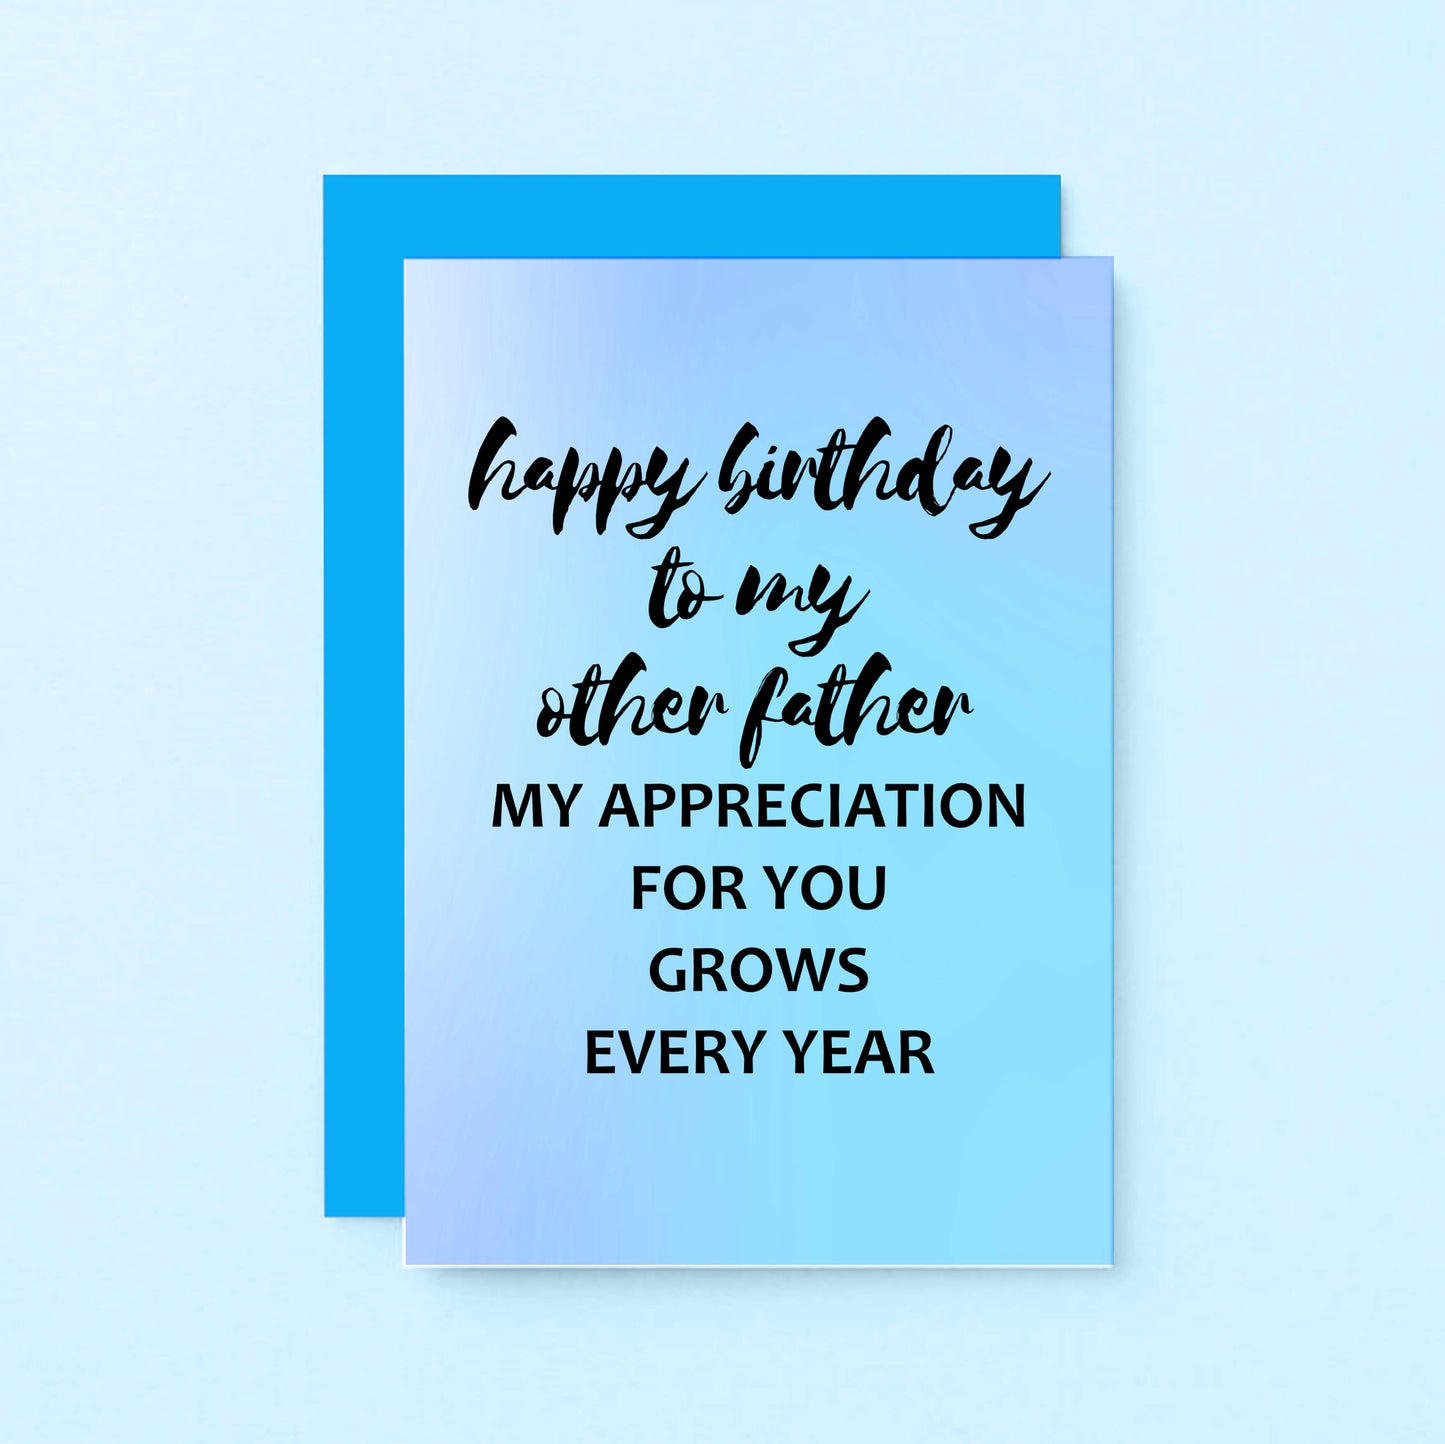 Other Father Birthday Card by SixElevenCreations. Reads Happy birthday to my other father. My appreciation for you grows every year. Product Code SE3031A6